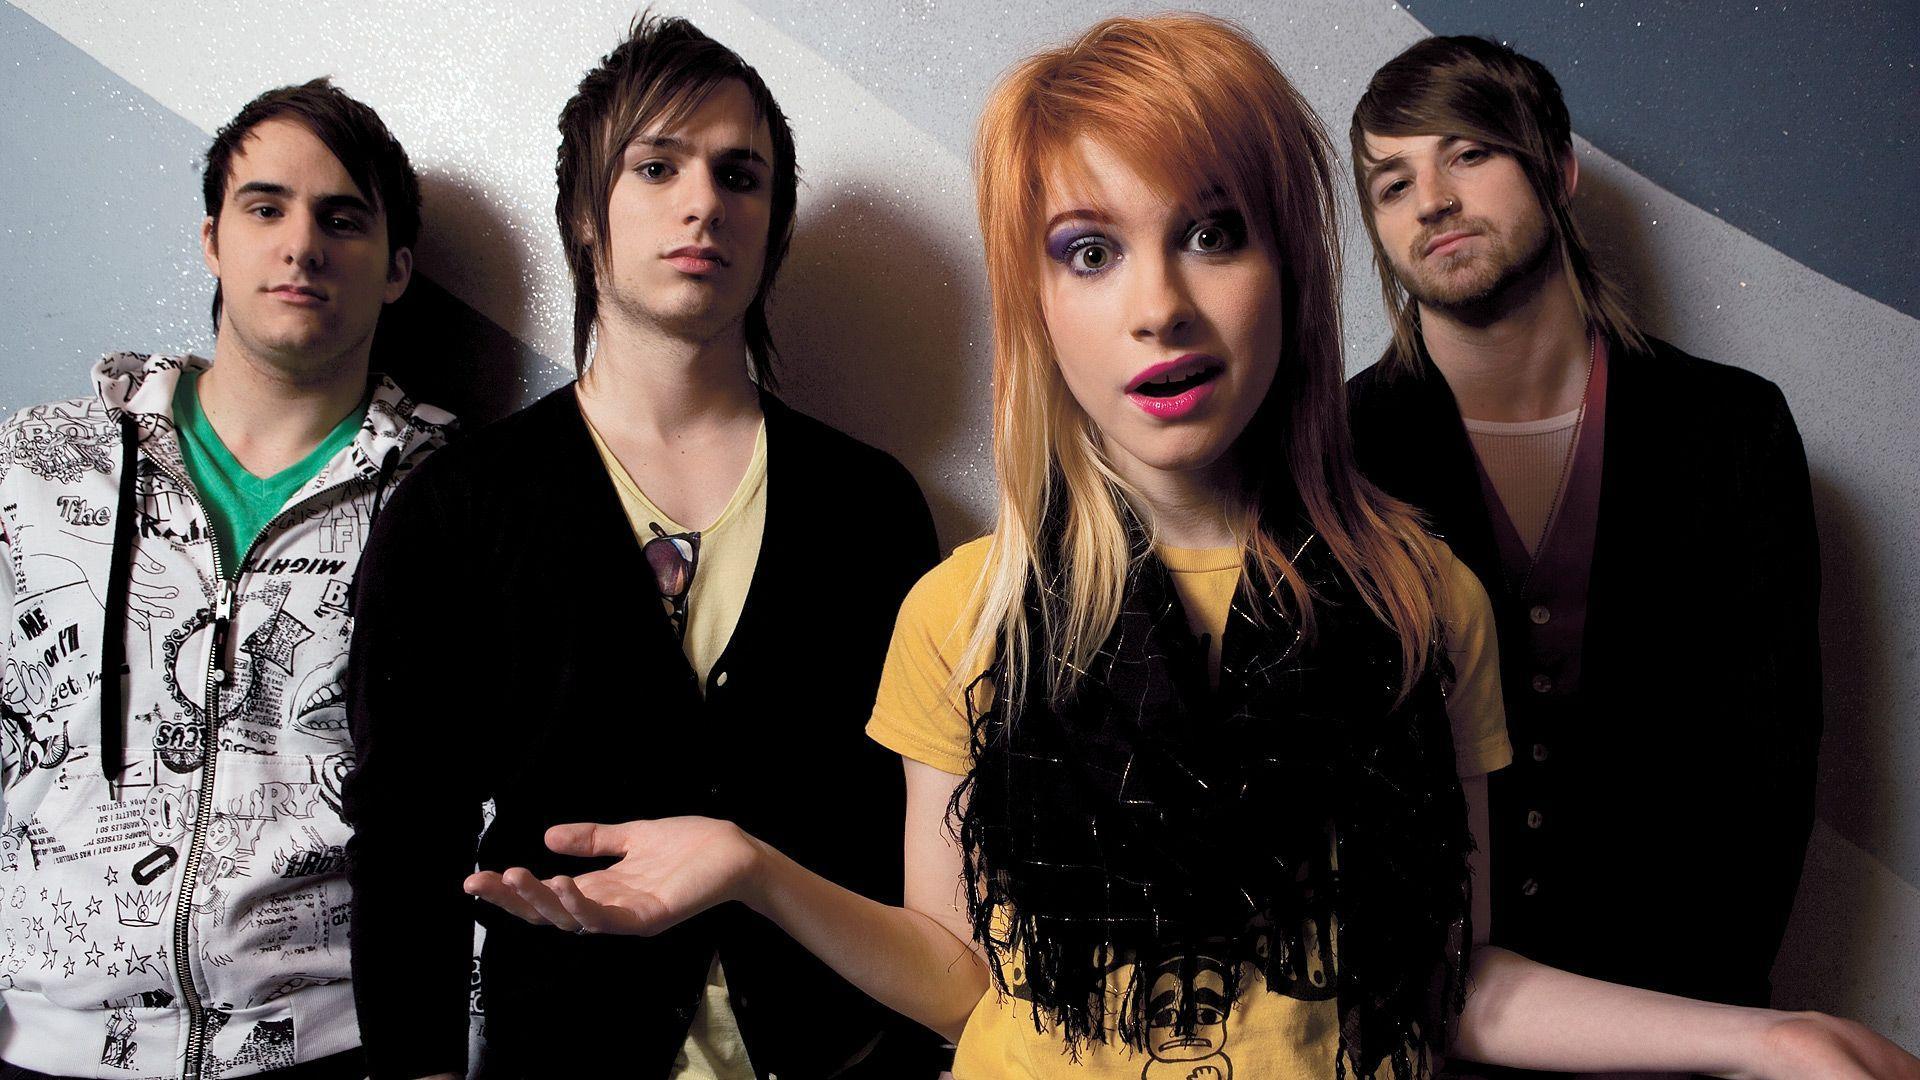 Paramore Wallpaper Wide Background #qf51011qc3